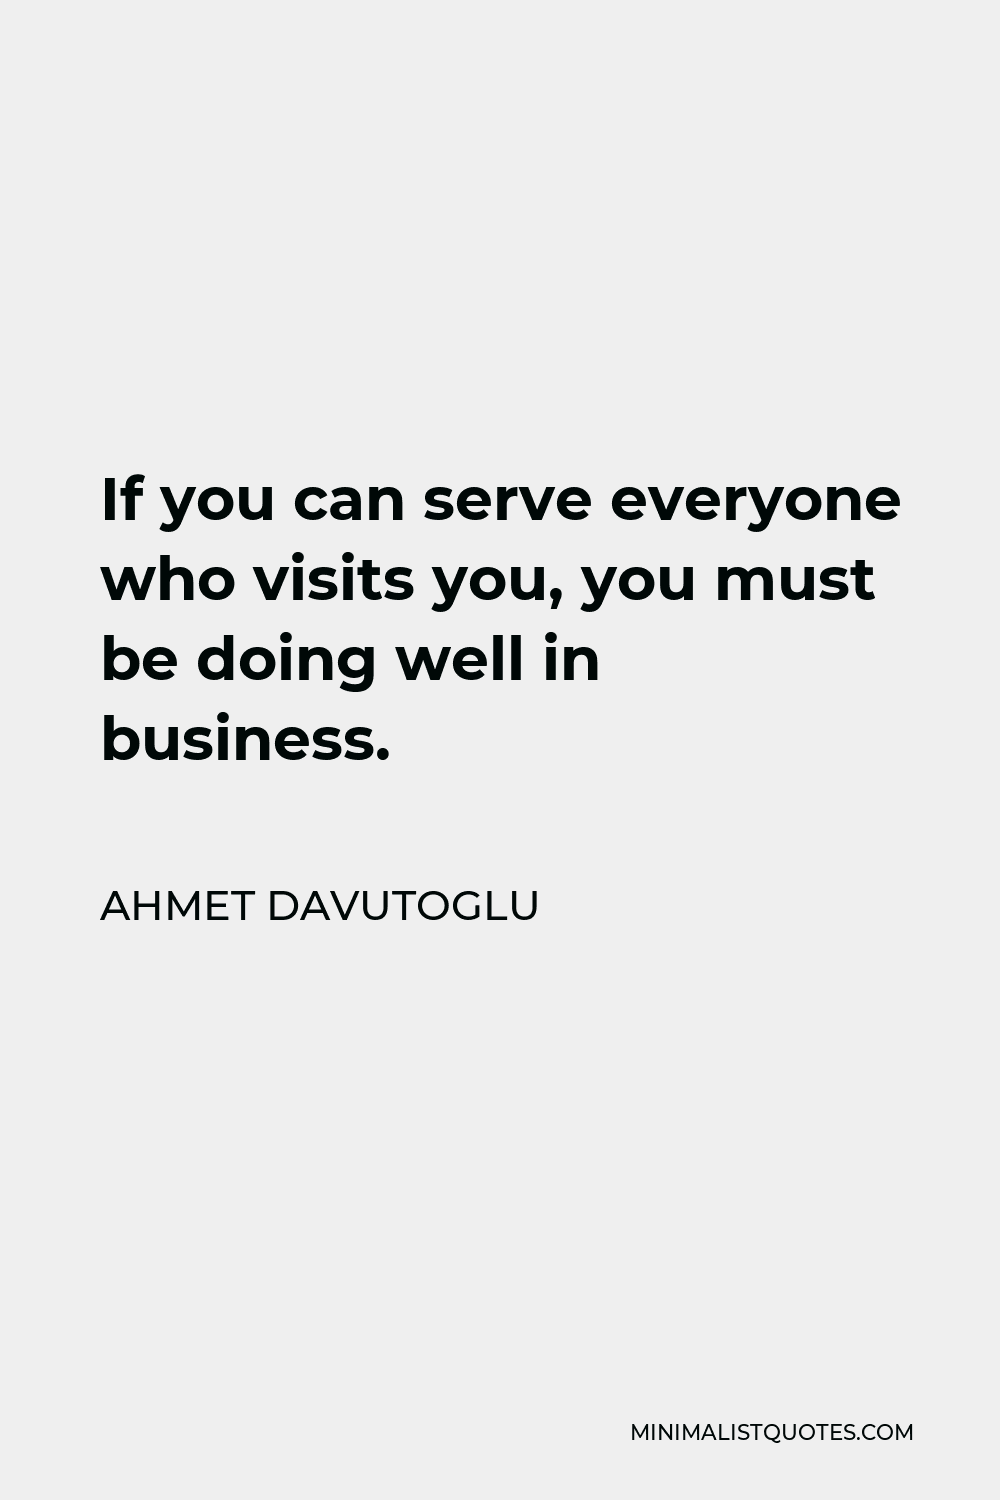 Ahmet Davutoglu Quote - If you can serve everyone who visits you, you must be doing well in business.